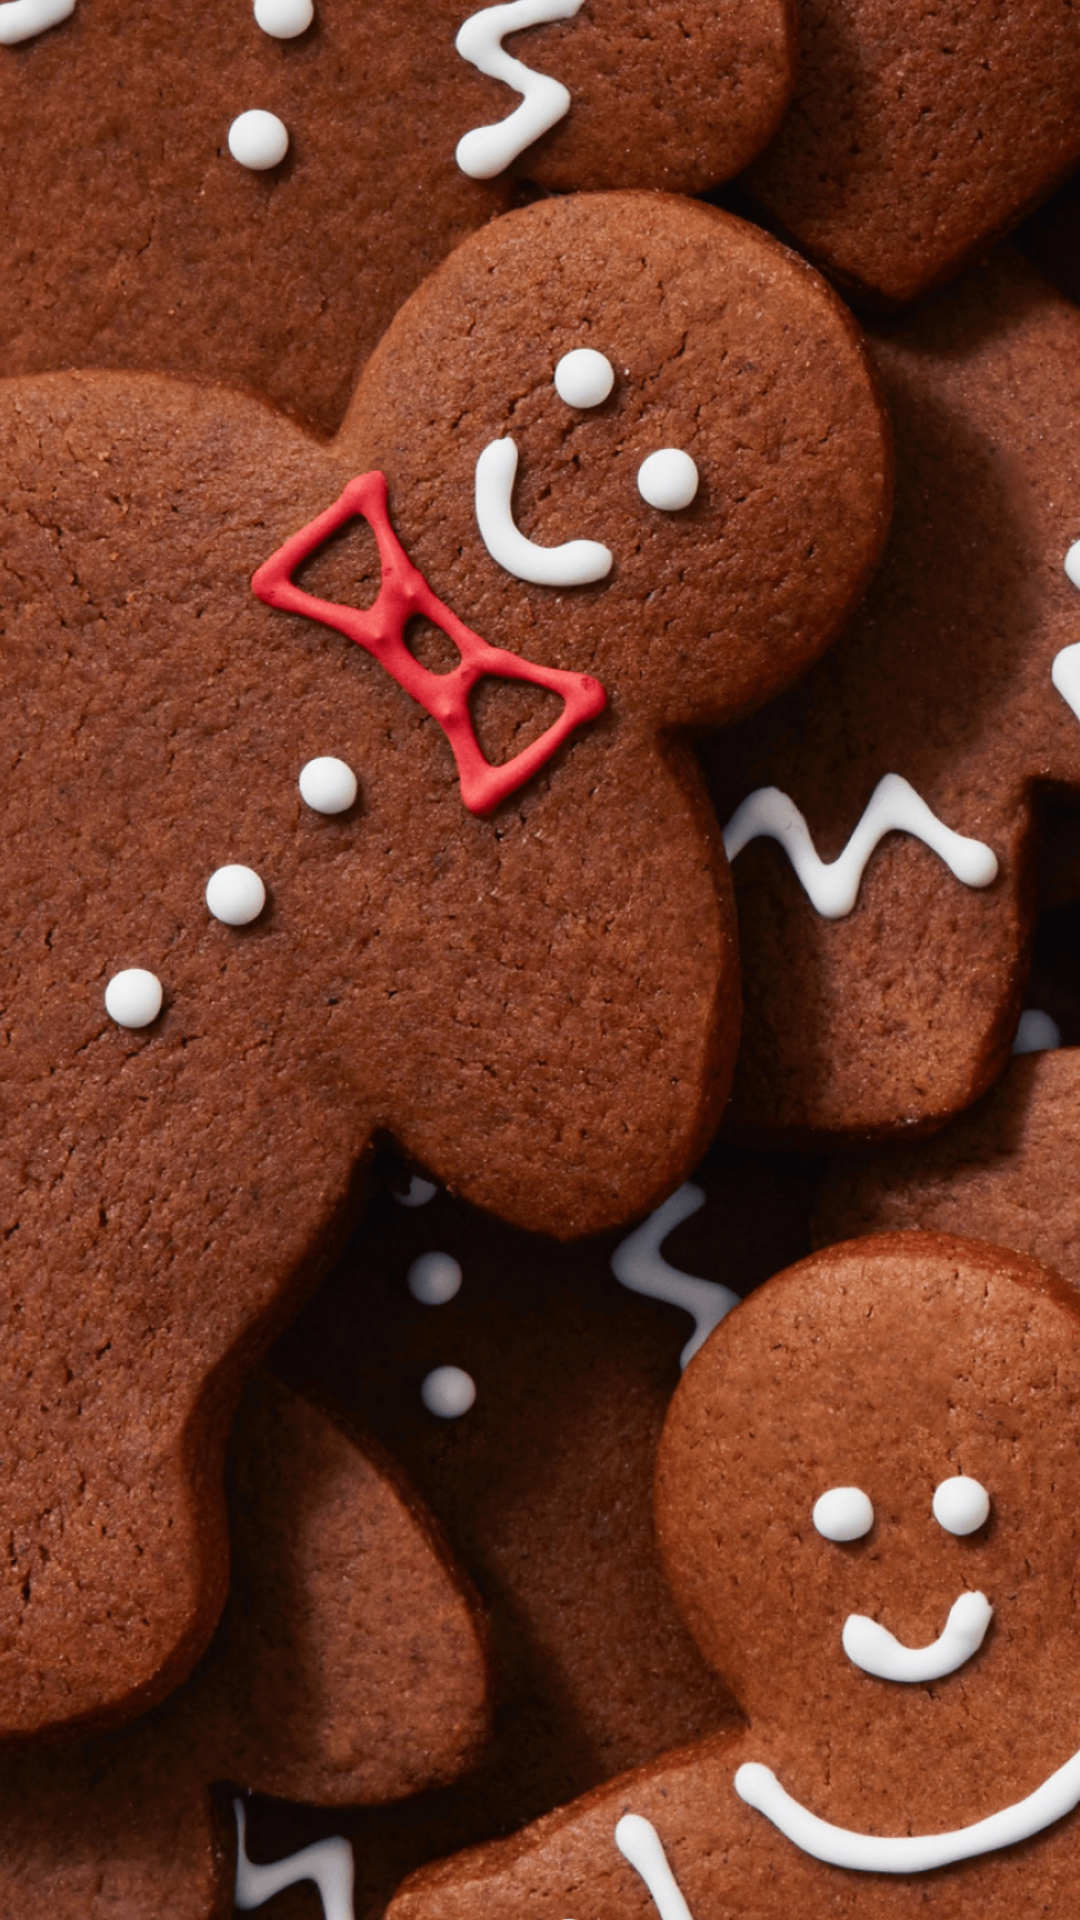 Gingerbread Man, Tasty cookie delight, Yummy holiday treat, Edible art, 1080x1920 Full HD Phone